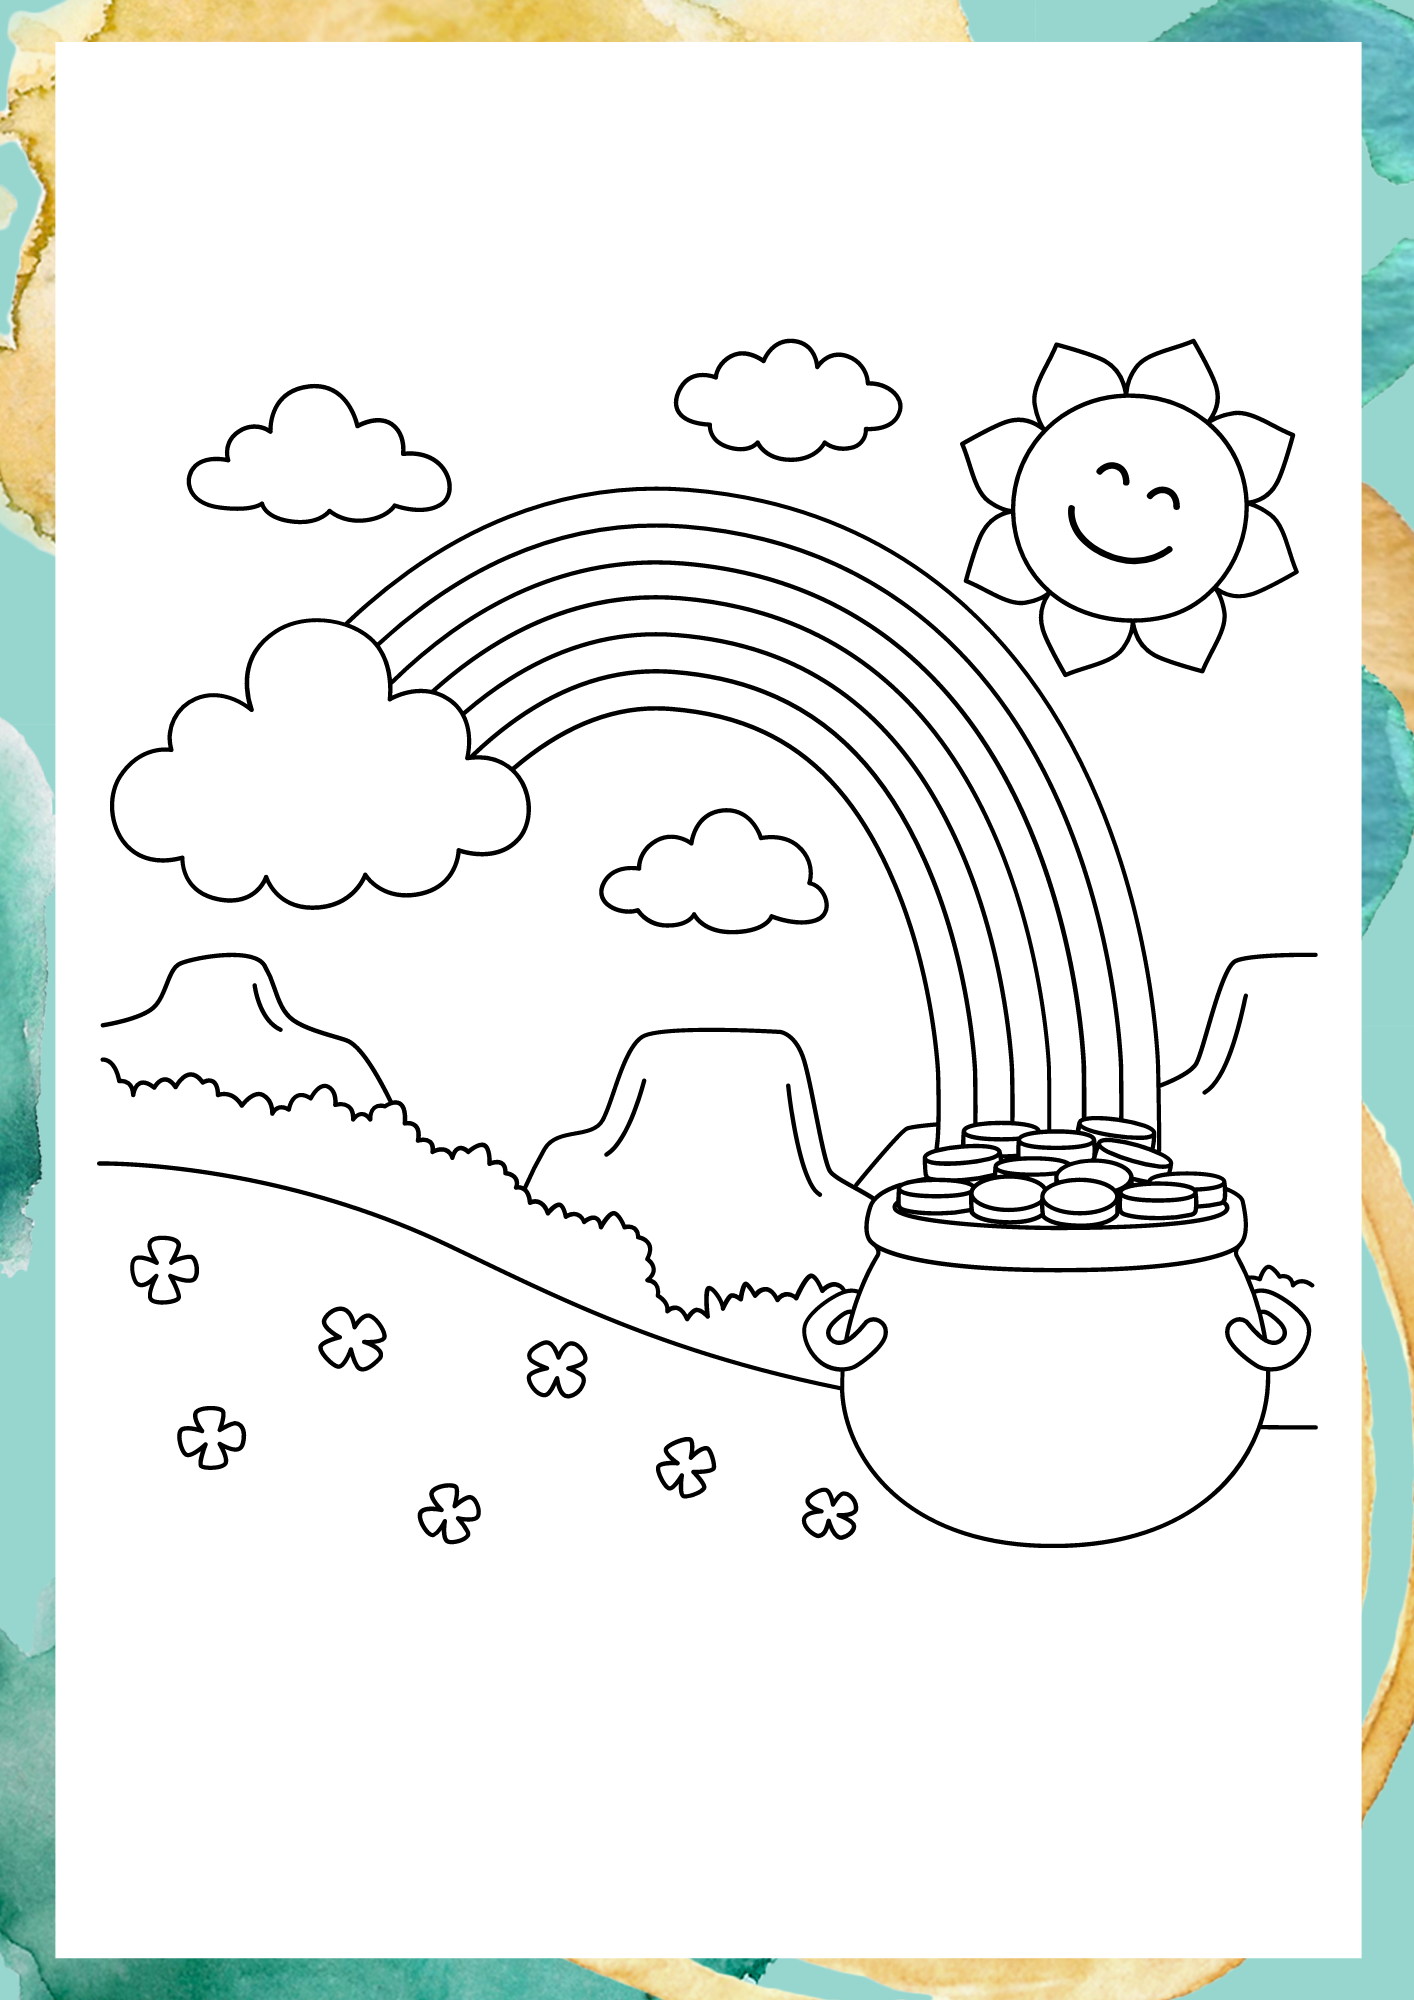 rainbow coloring page, unicorn coloring page, unicorn coloring pages, coloring page, coloring page for toddlers, Coloring Page, coloring sheet, happy color, colouring, free coloring pages, coloring pages for kids, printable coloring pages, cute coloring pages, colouring pages, colouring to print, free printable coloring pages, free coloring pages for kids, easy coloring pages, coloring sheets